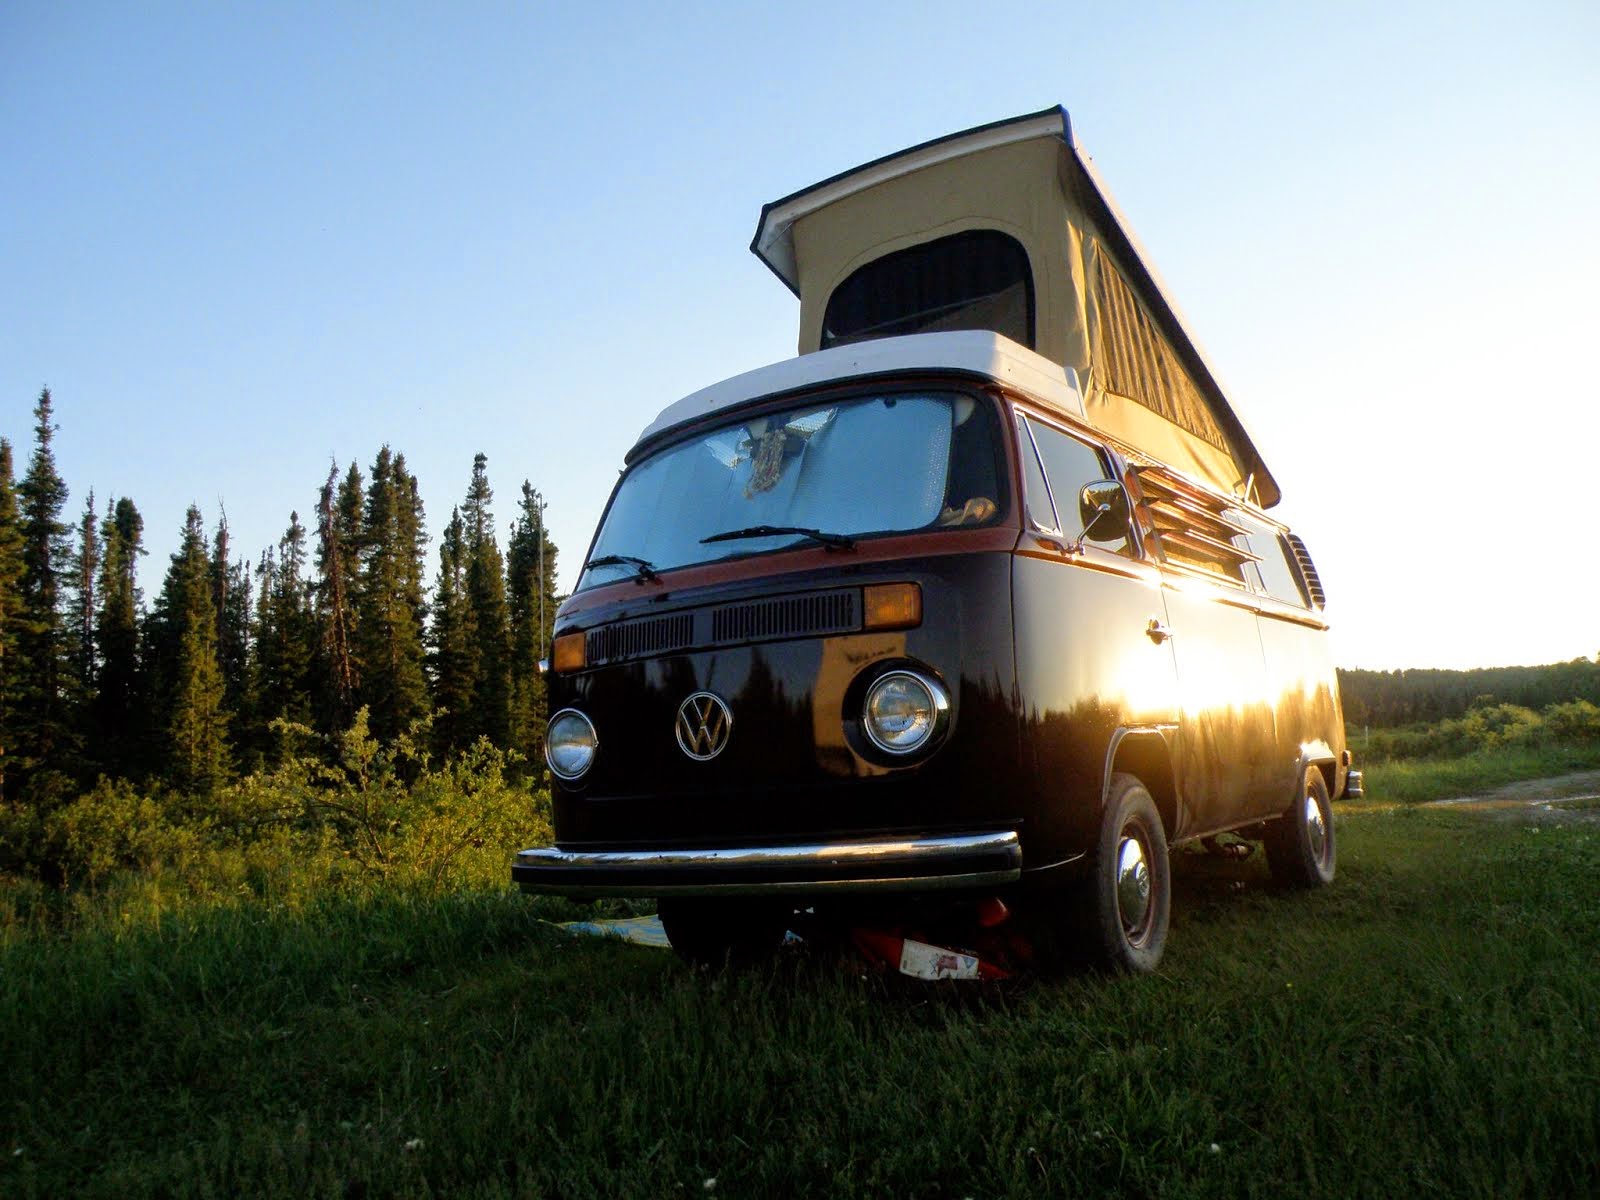 Suzanne the Van - A 1978 VW Bay Window Bus Comes Back to Life: Major